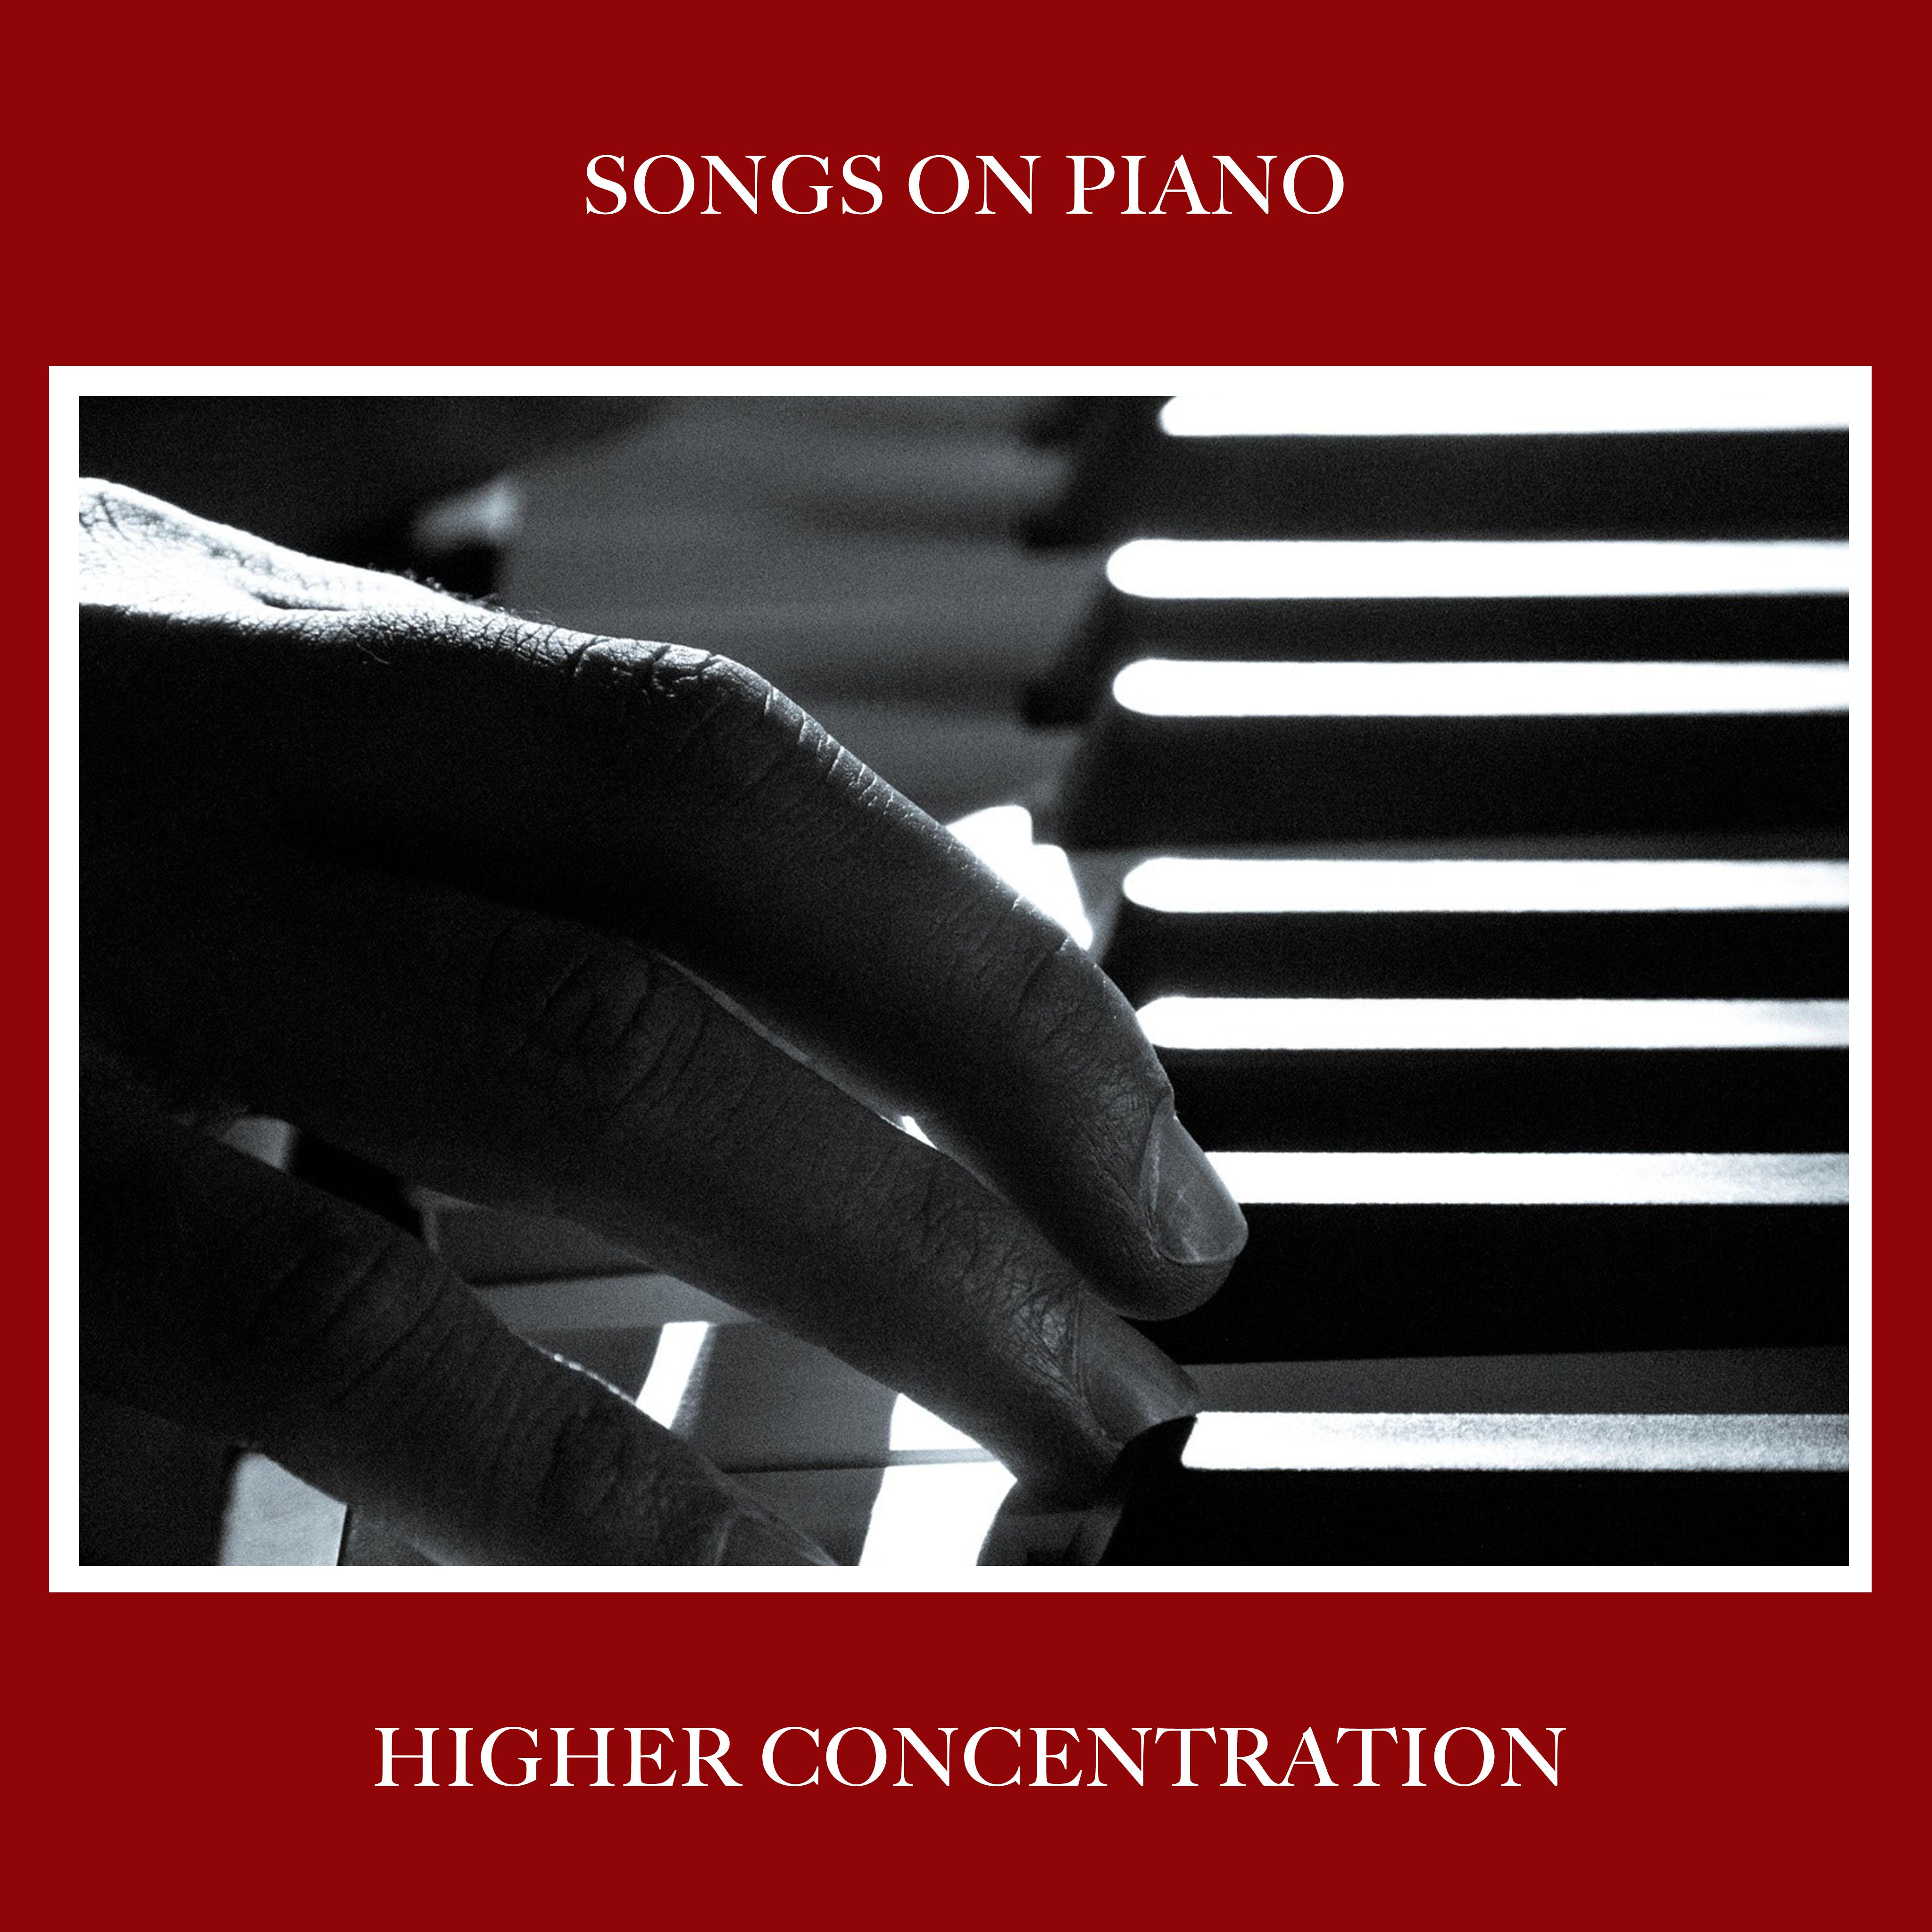 16 Songs on Piano for Higher Concentration